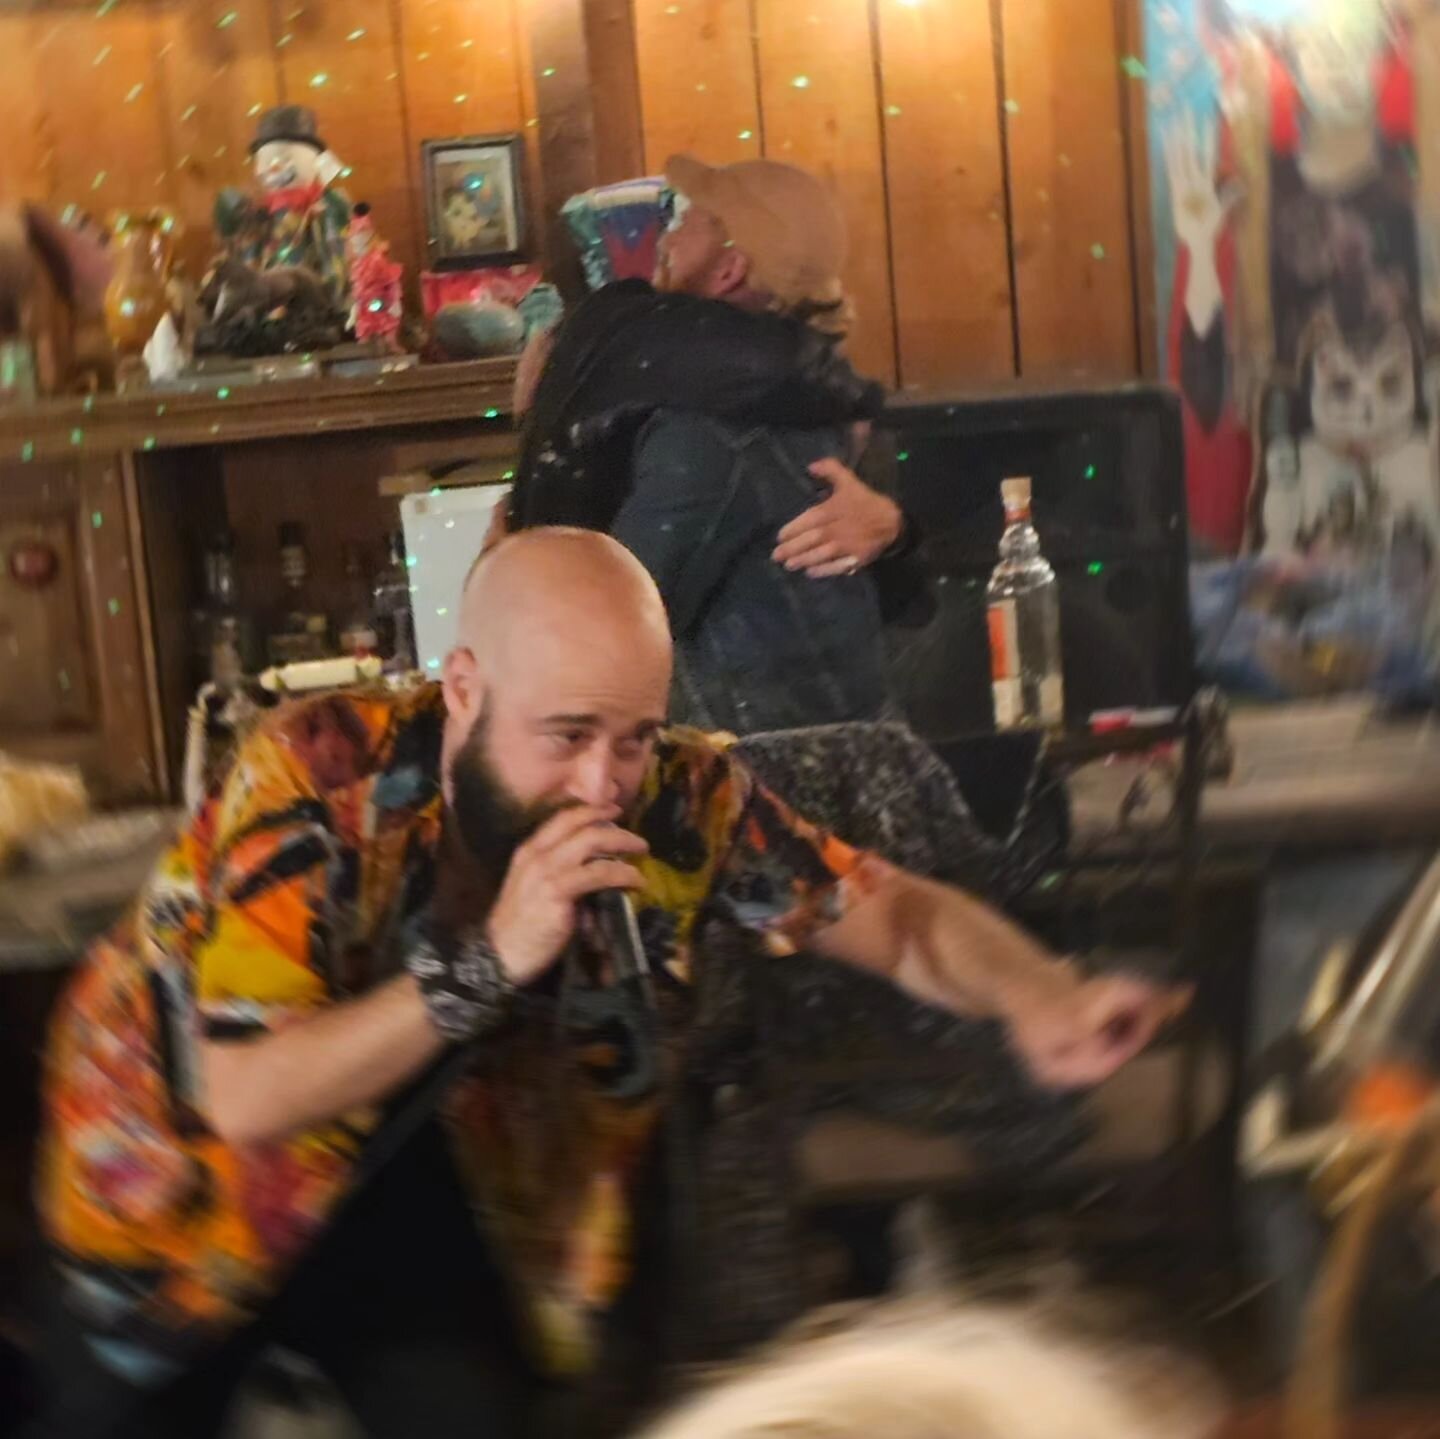 Shout out to @ltheadtrip for rockin an hour plus set with 36 hours notice and shout out to @katmandoodle and Smyles for opening up the gates to Anarchy Acres to let him do it. Peace to everyone that came out to support - especially those that drove u